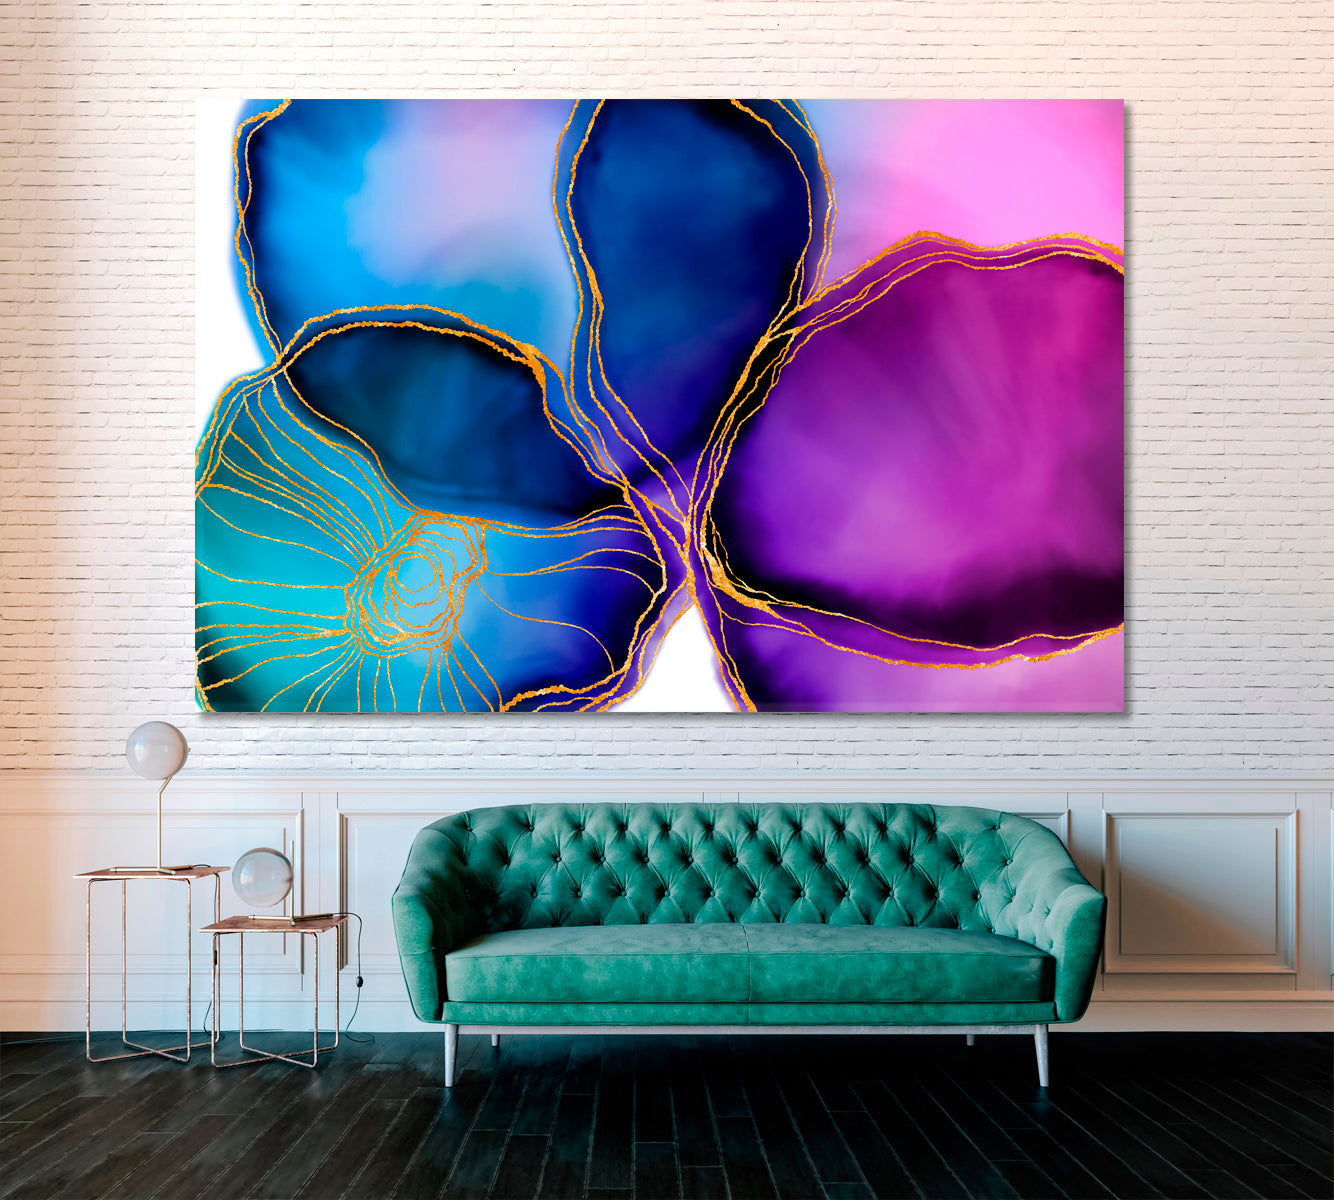 Elegant Abstract Flower Canvas Print ArtLexy 1 Panel 24"x16" inches 